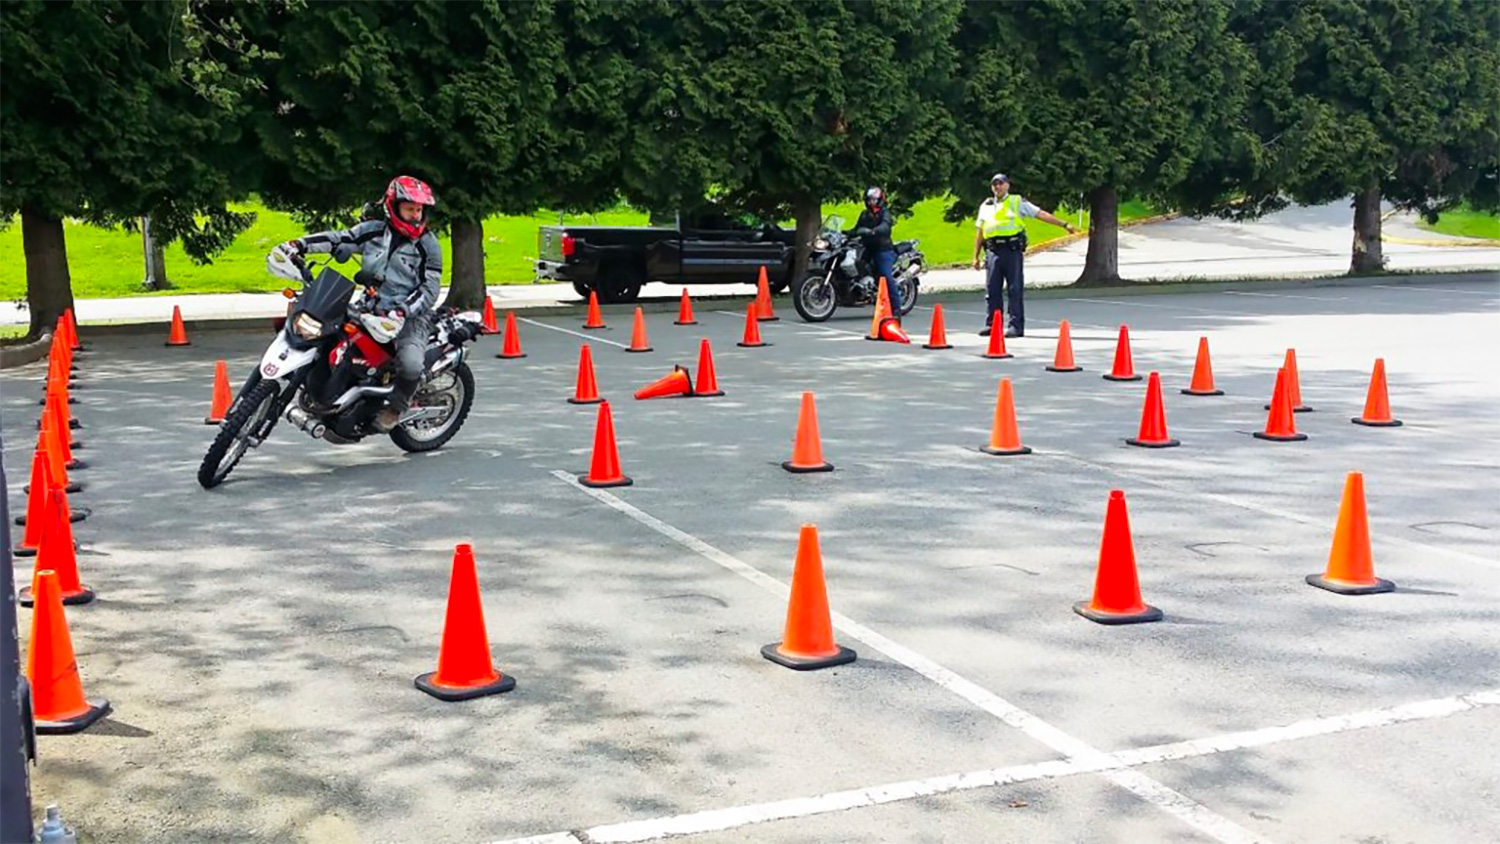 A motorcyclist undergoes training in a car park area